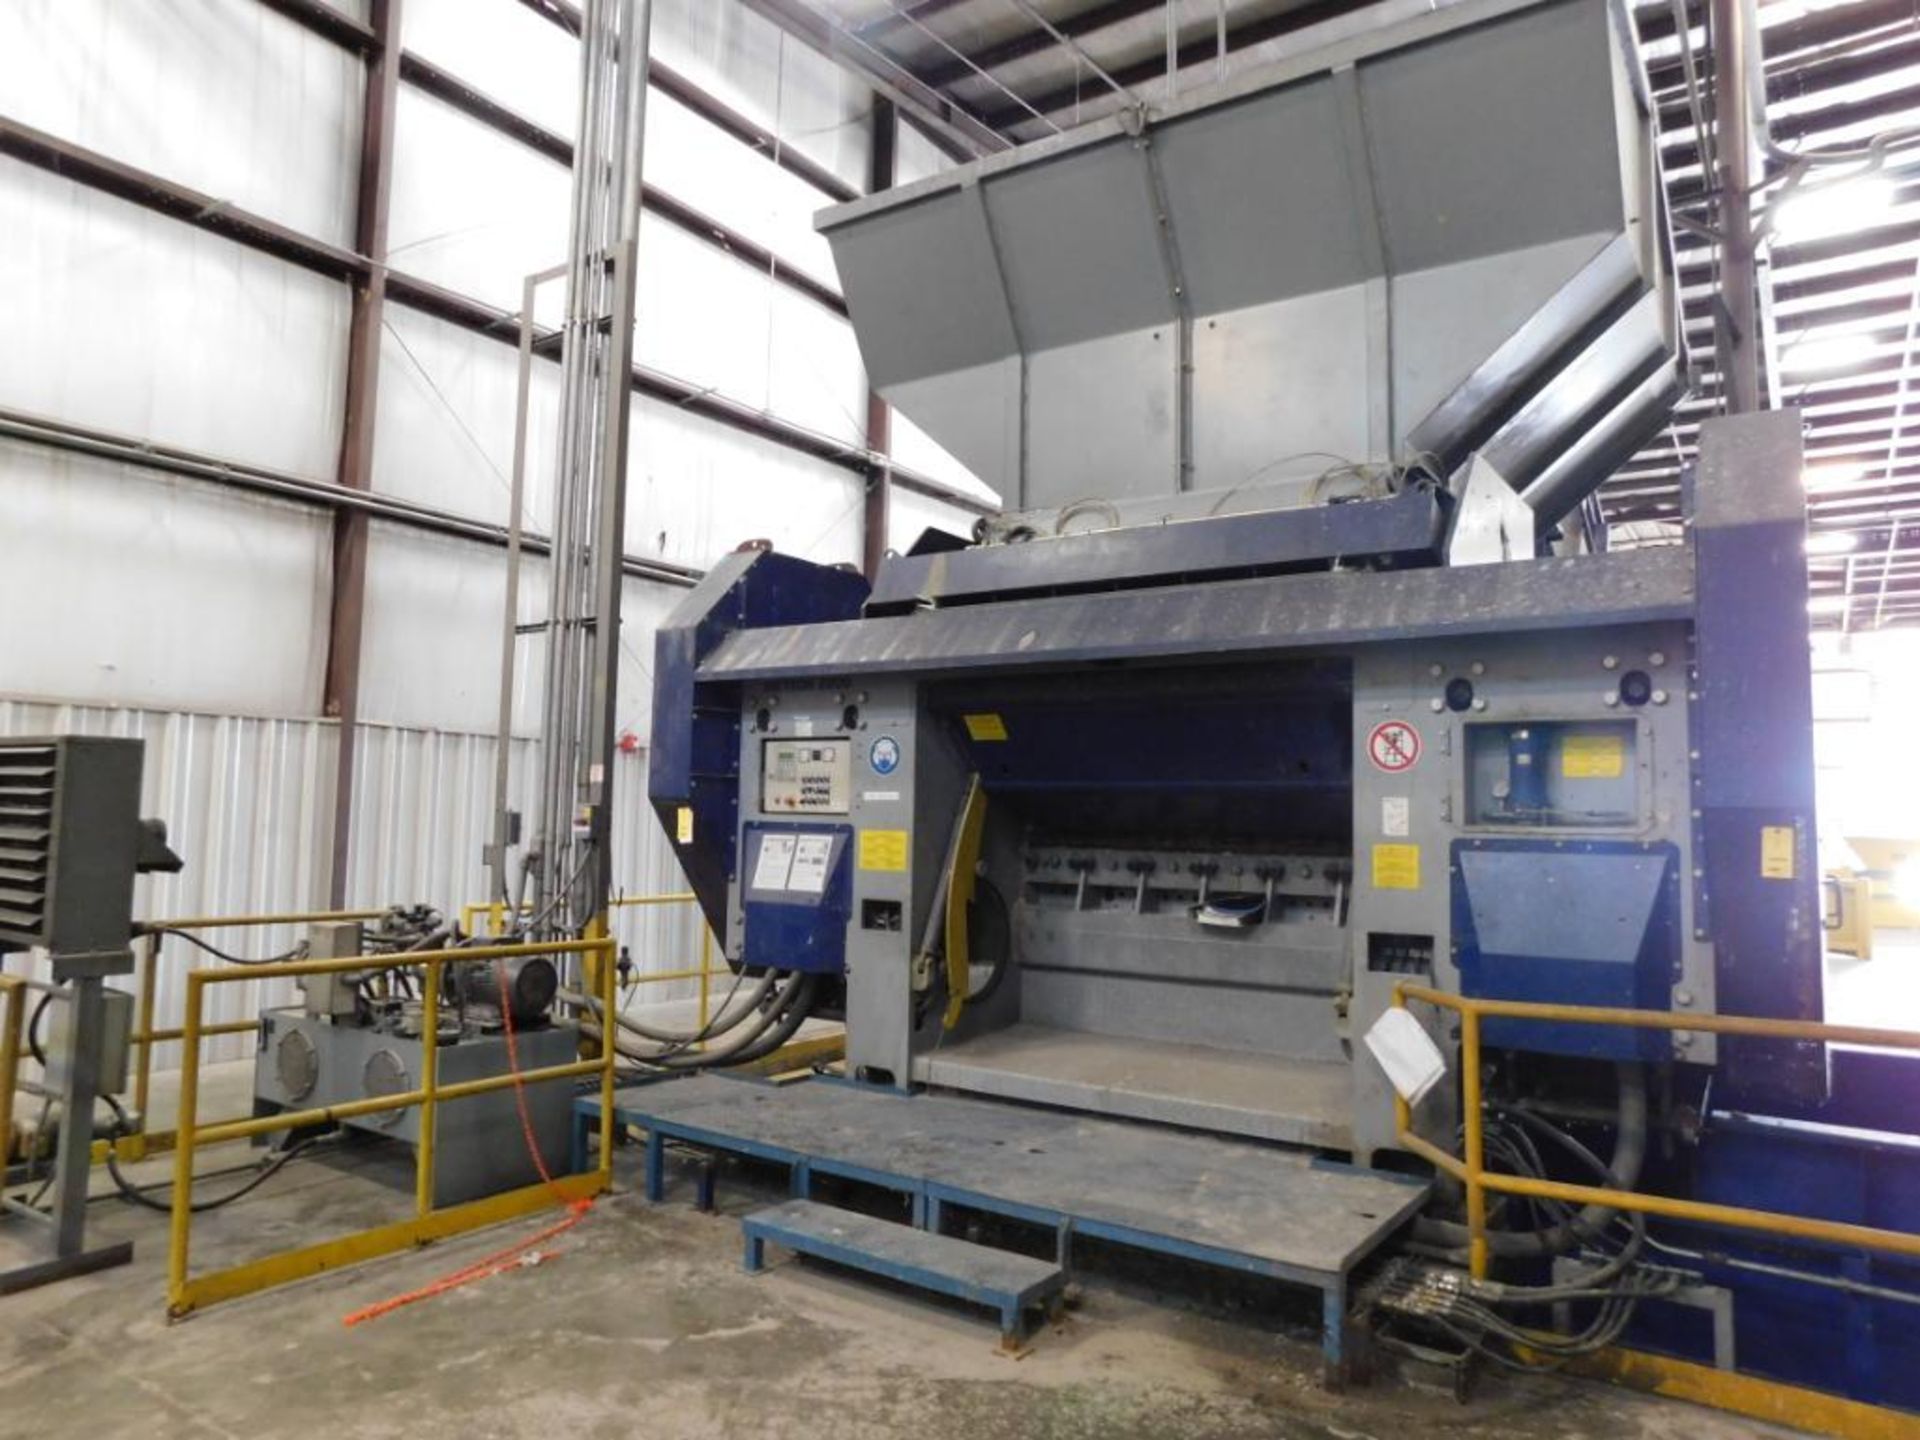 LOT: Shredder & Conveyor Line with Parts consisting of Lots #3, #4, #5, #6